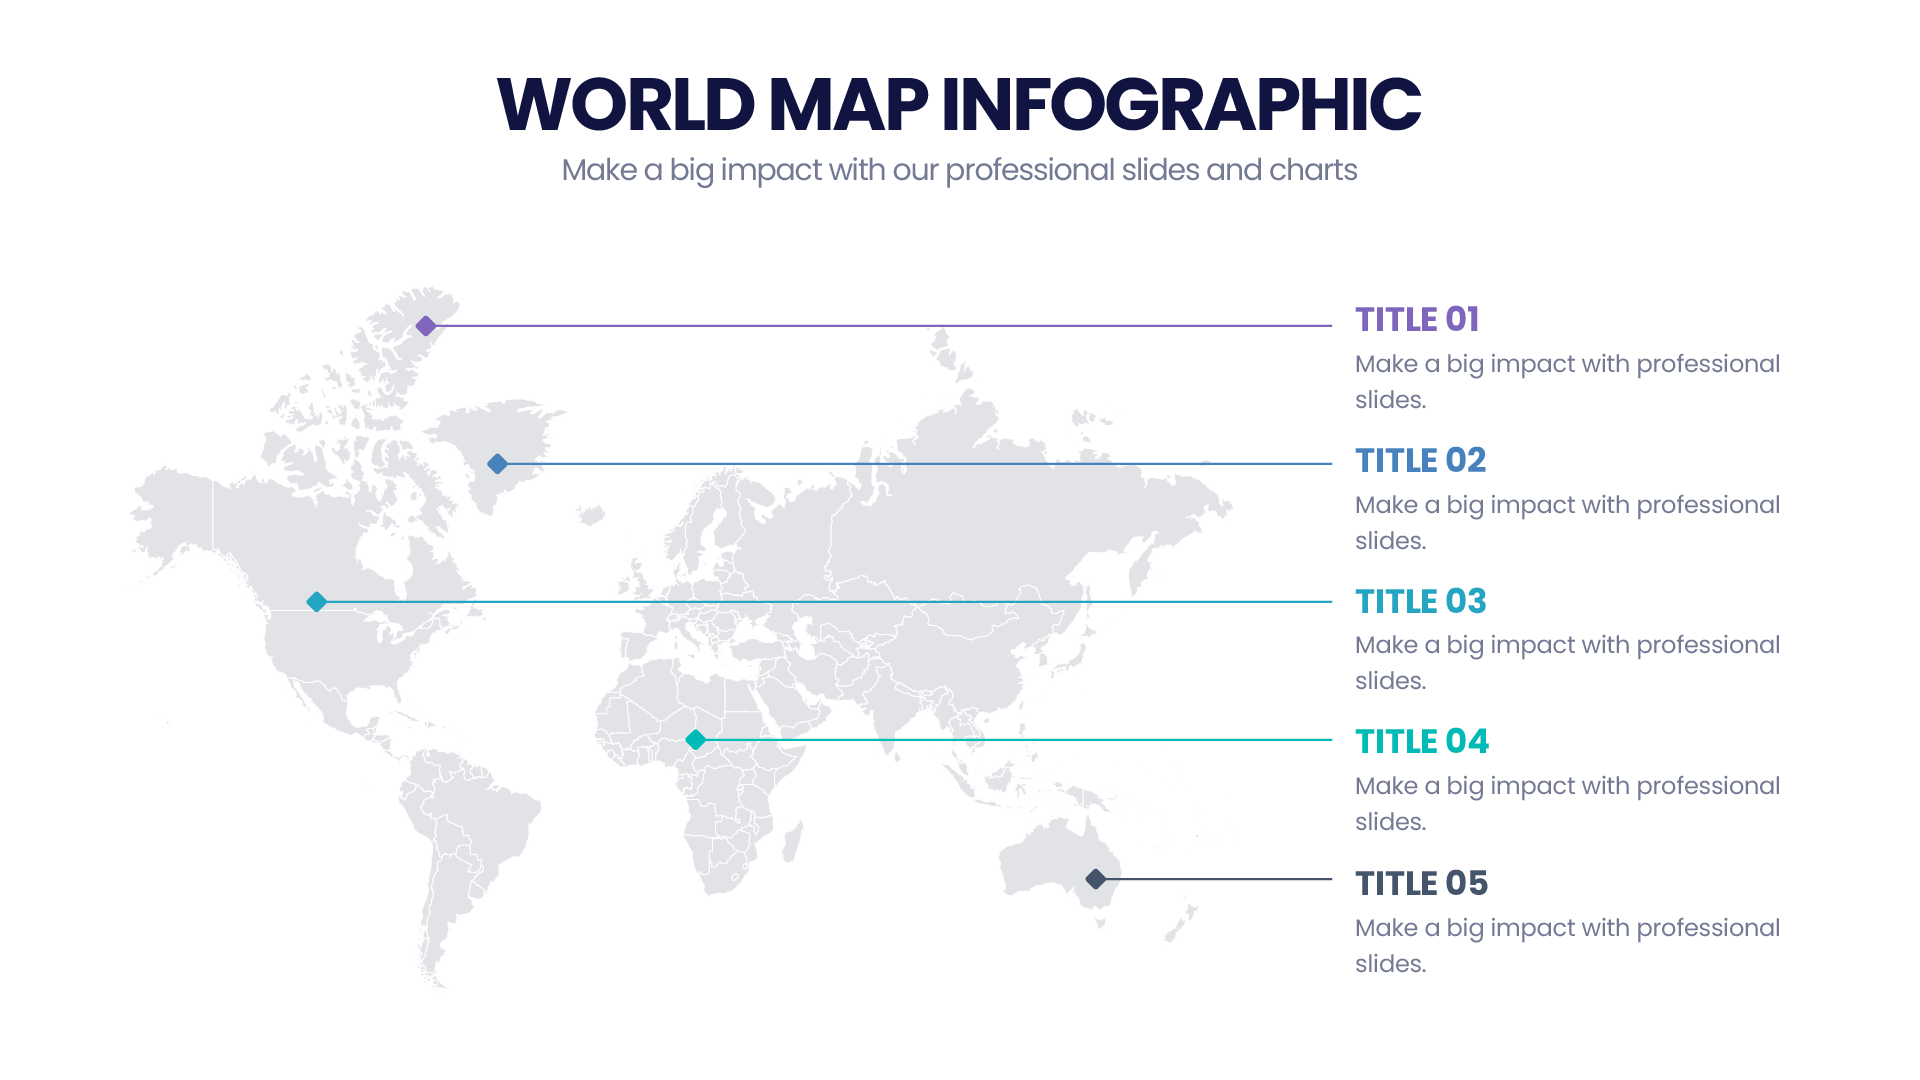 World Map Infographic templates